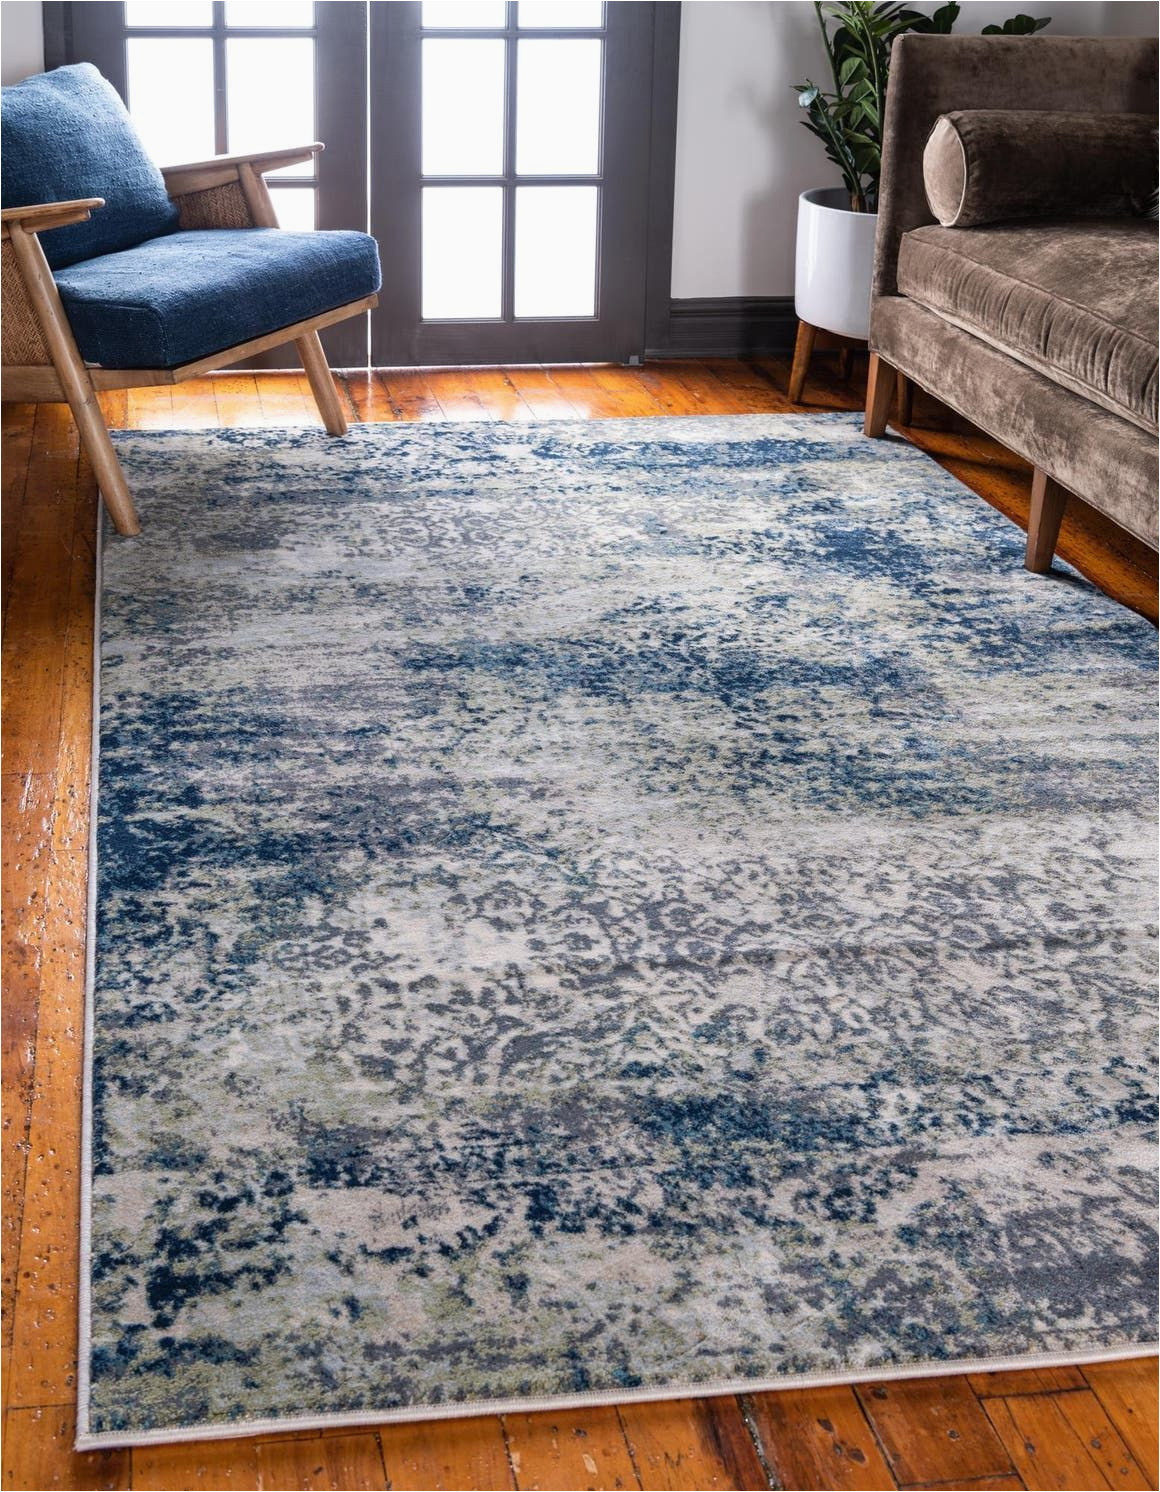 Rug with Blue Accents Navy Blue Ethereal area Rug Blue Accents Living Room